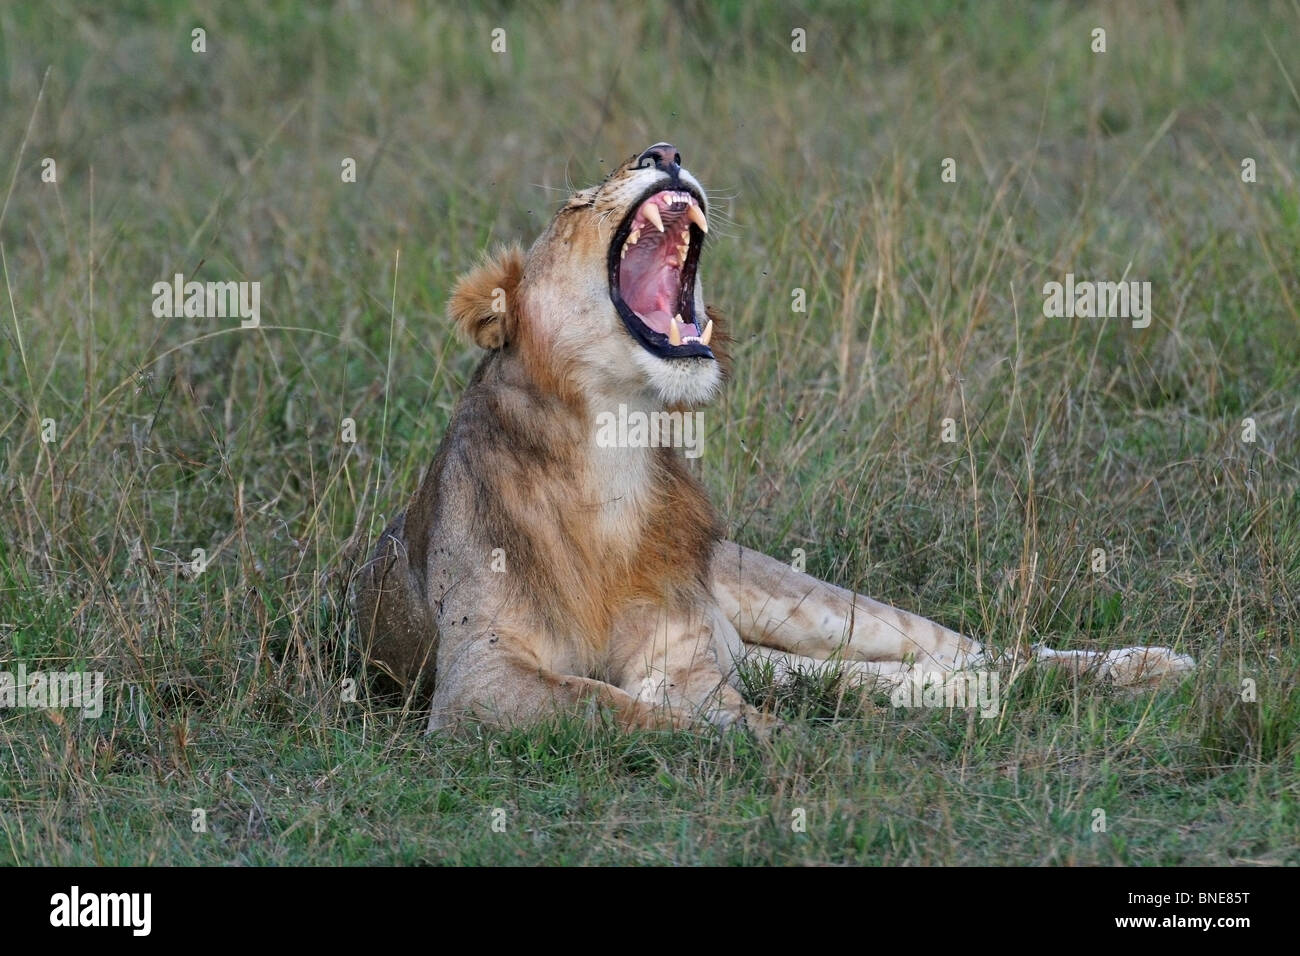 A young lion yawns while relaxing in Masai Mara National Reserve, Kenya, Africa Stock Photo